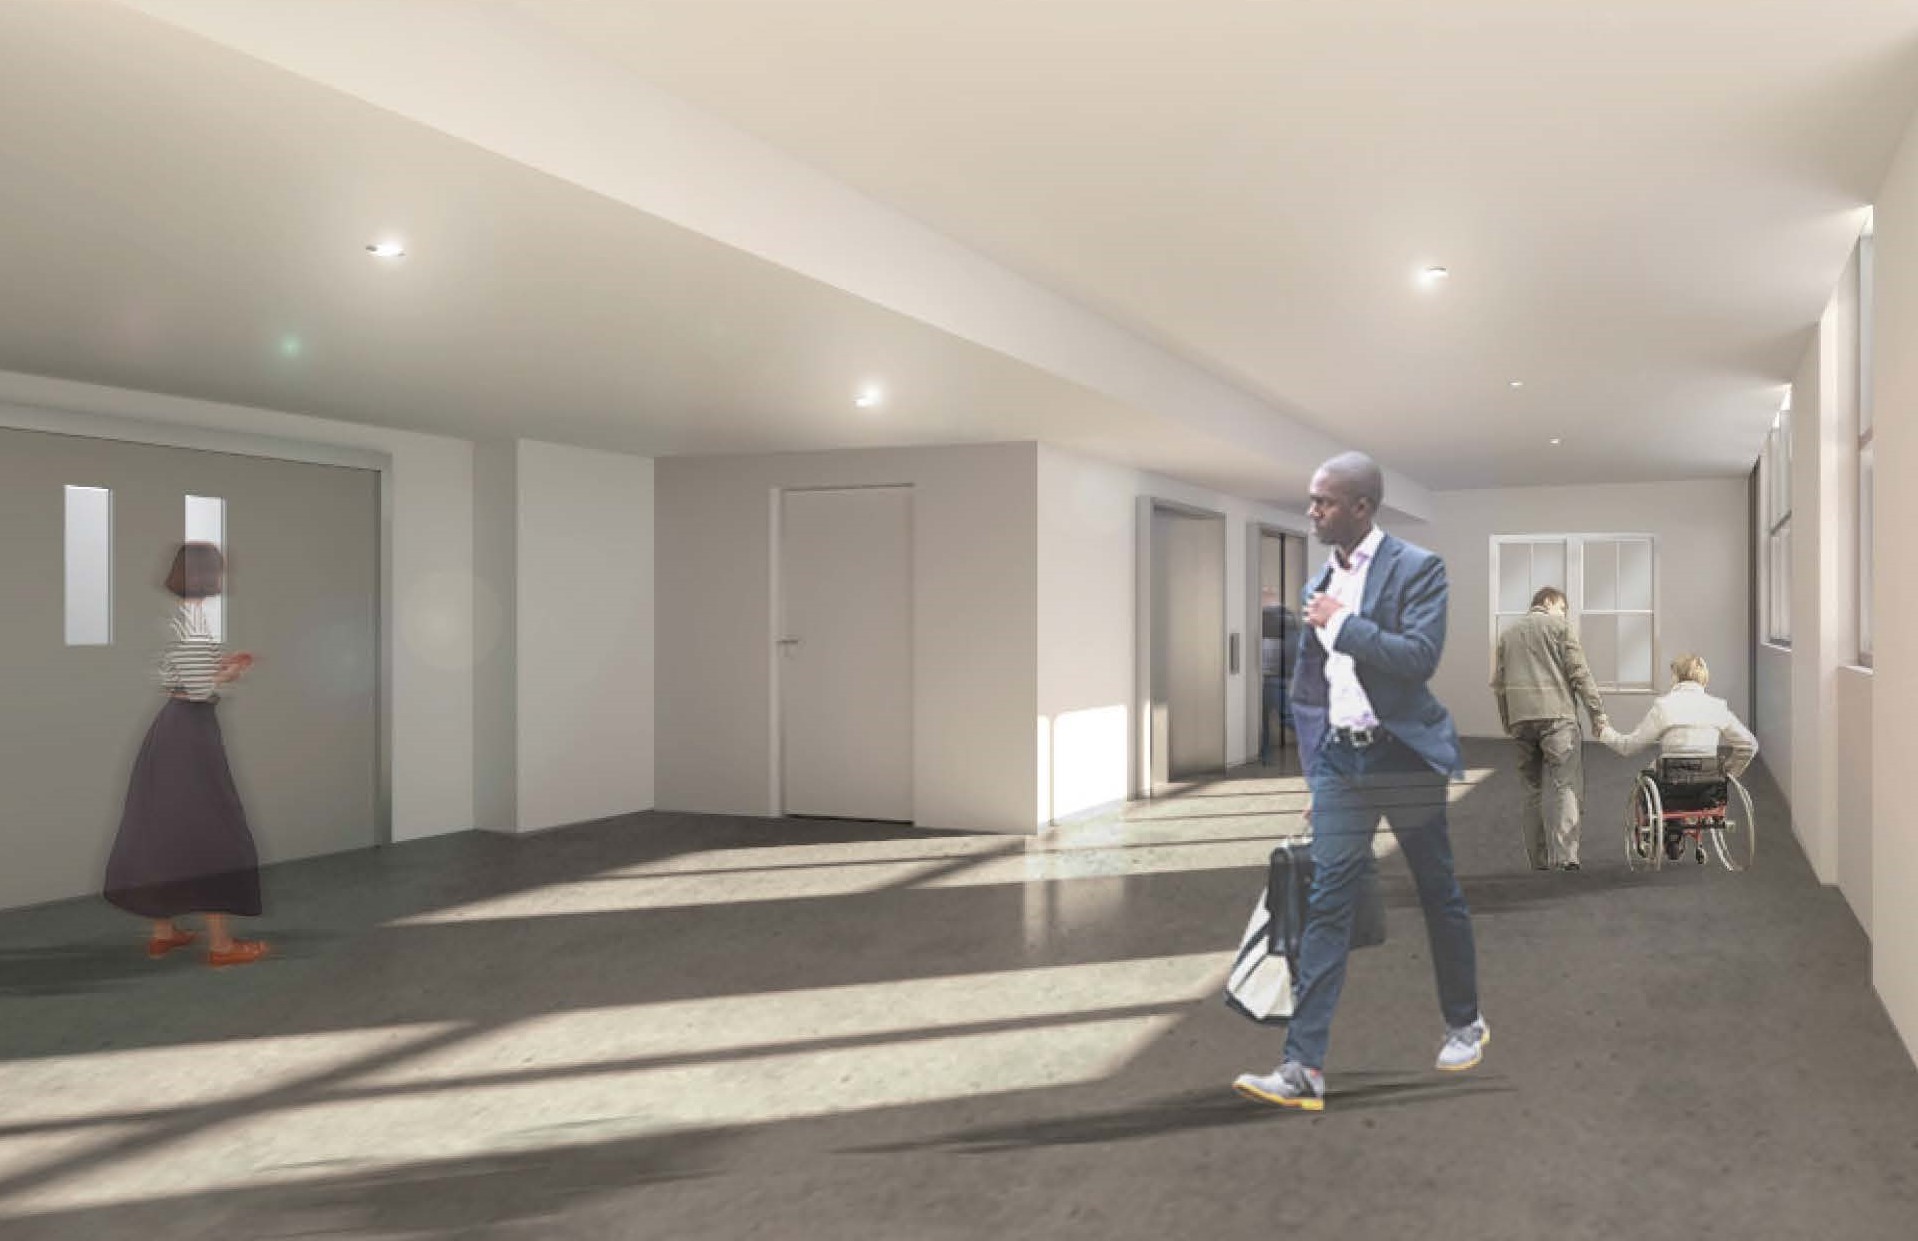  A rendering of the proposed new 8th floor lobby that includes a new elevator bank.